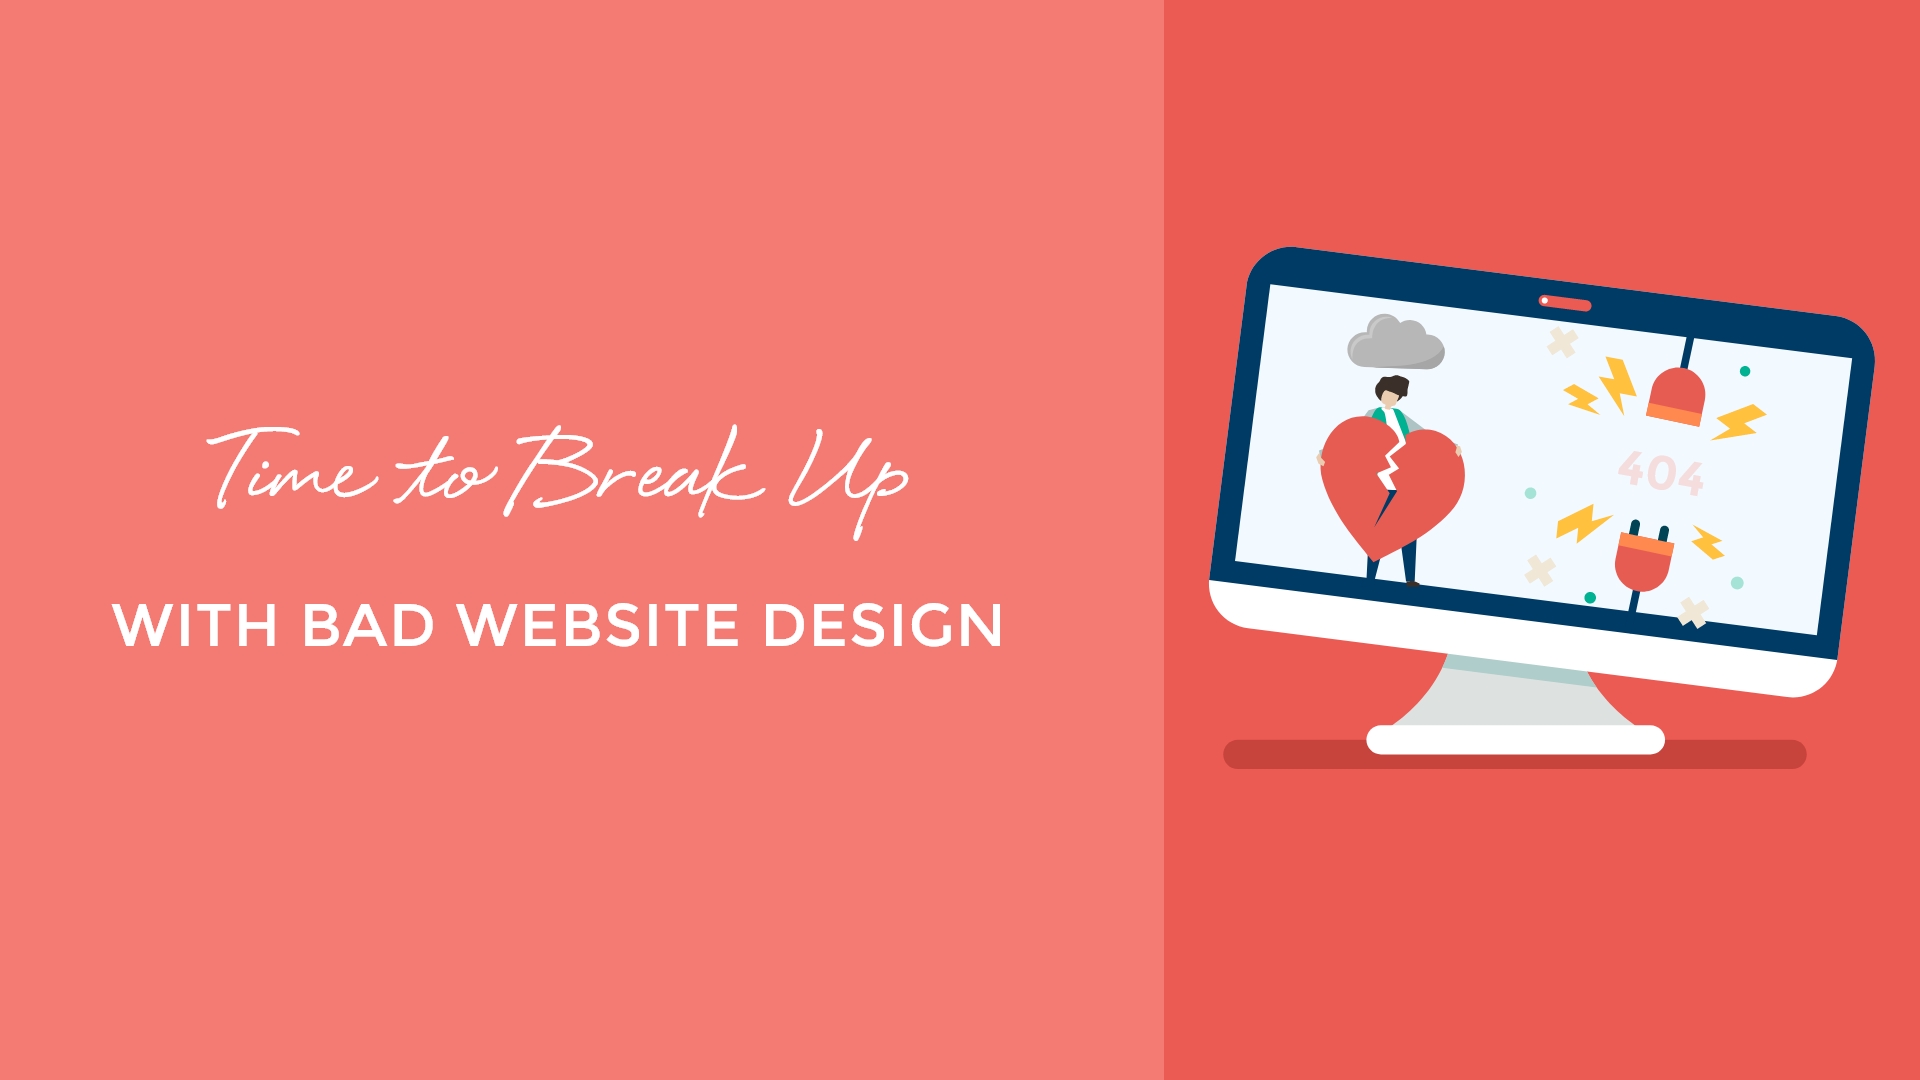 Time to Break Up with Bad Website Design